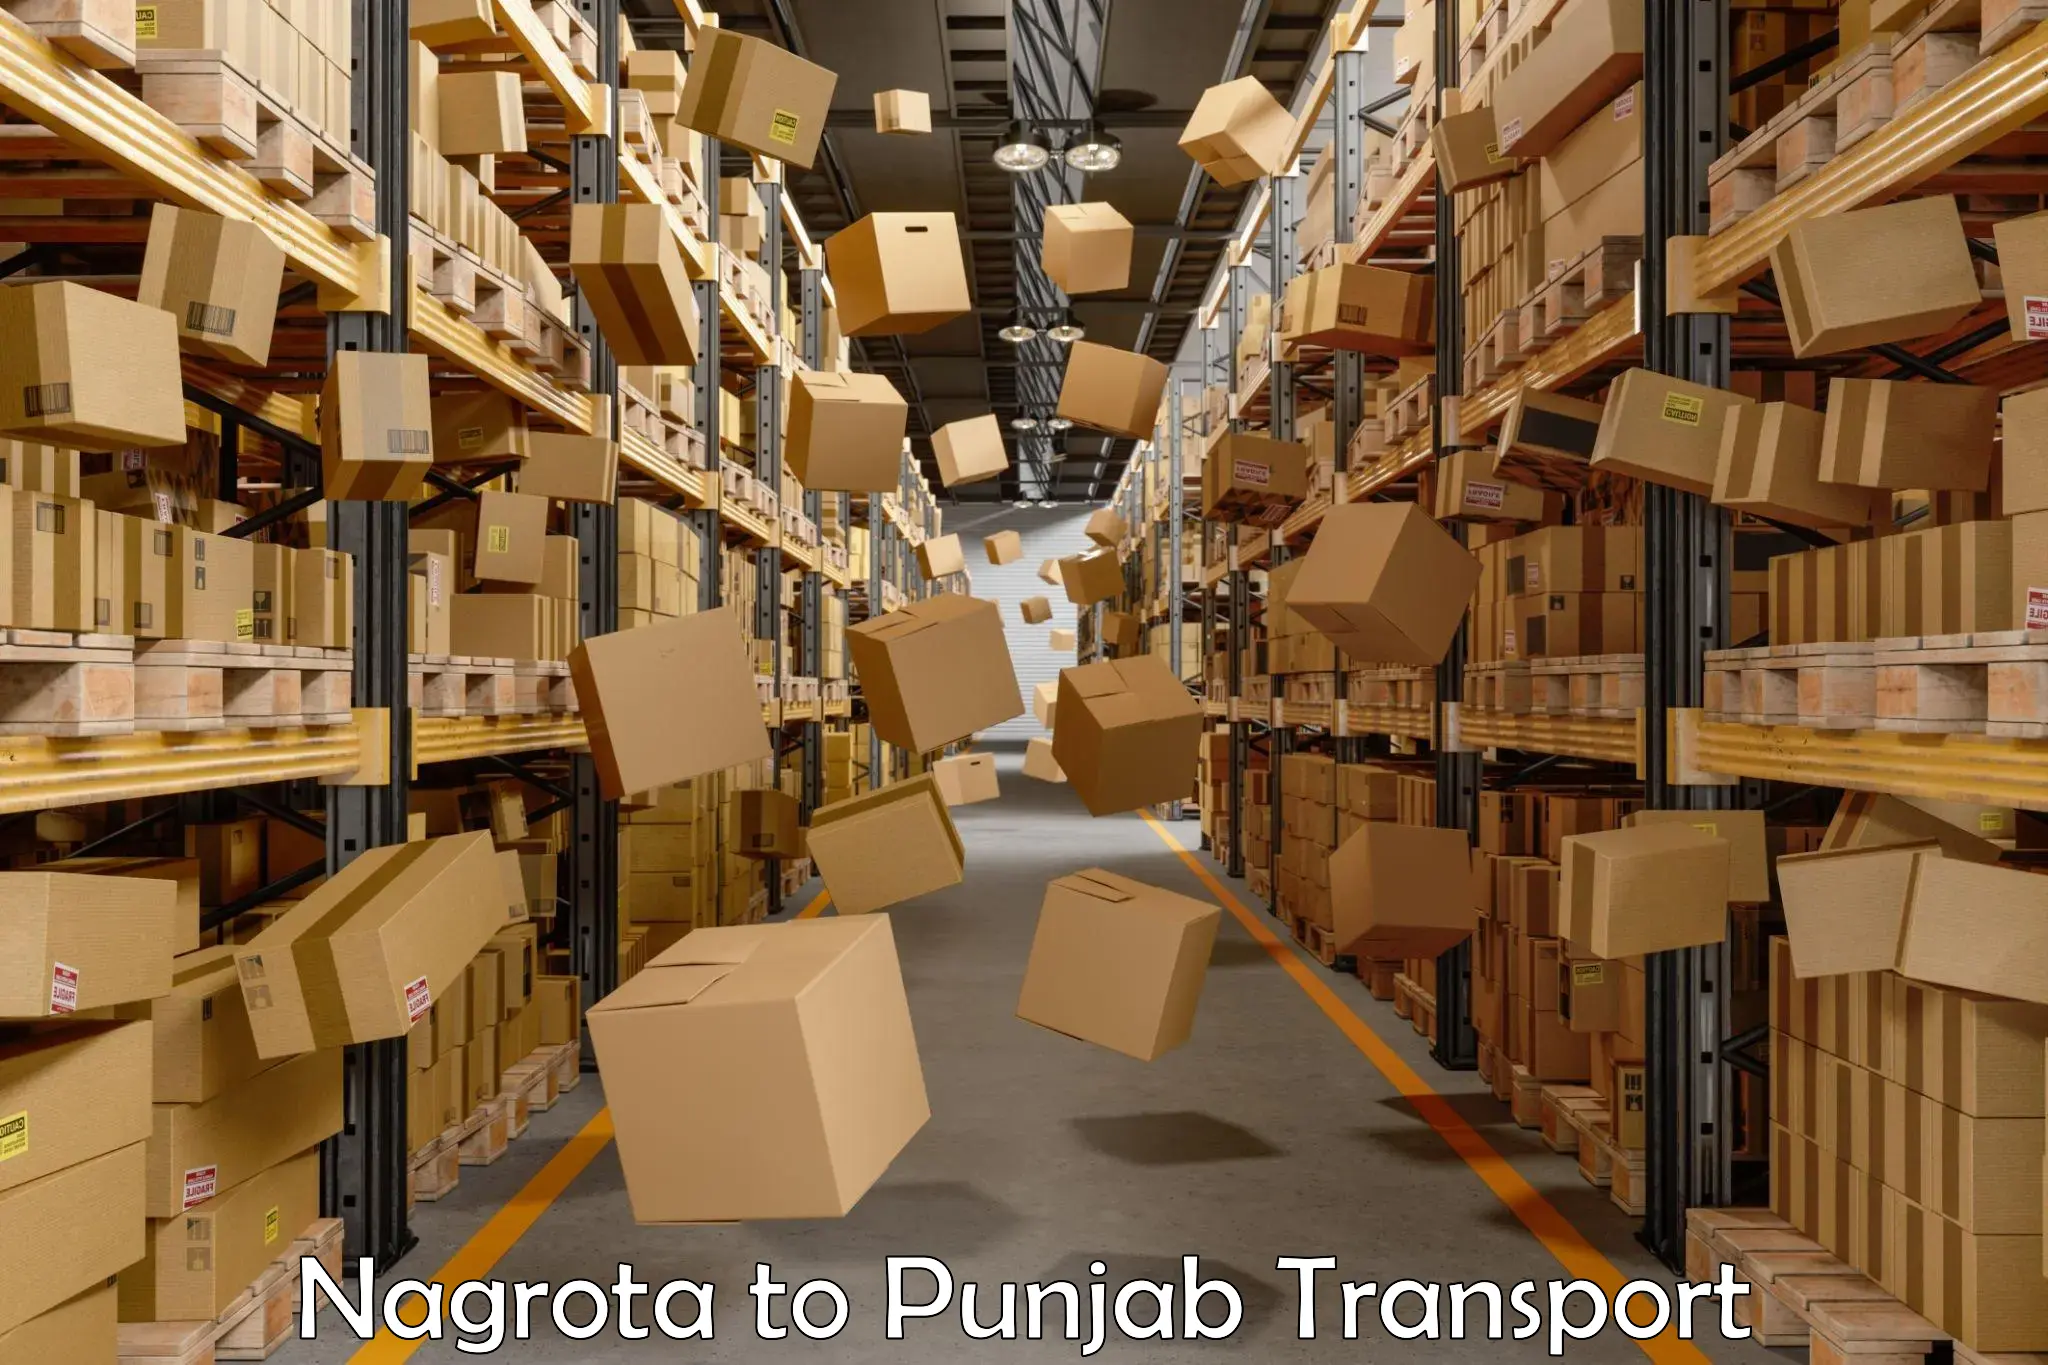 Express transport services Nagrota to Mohali